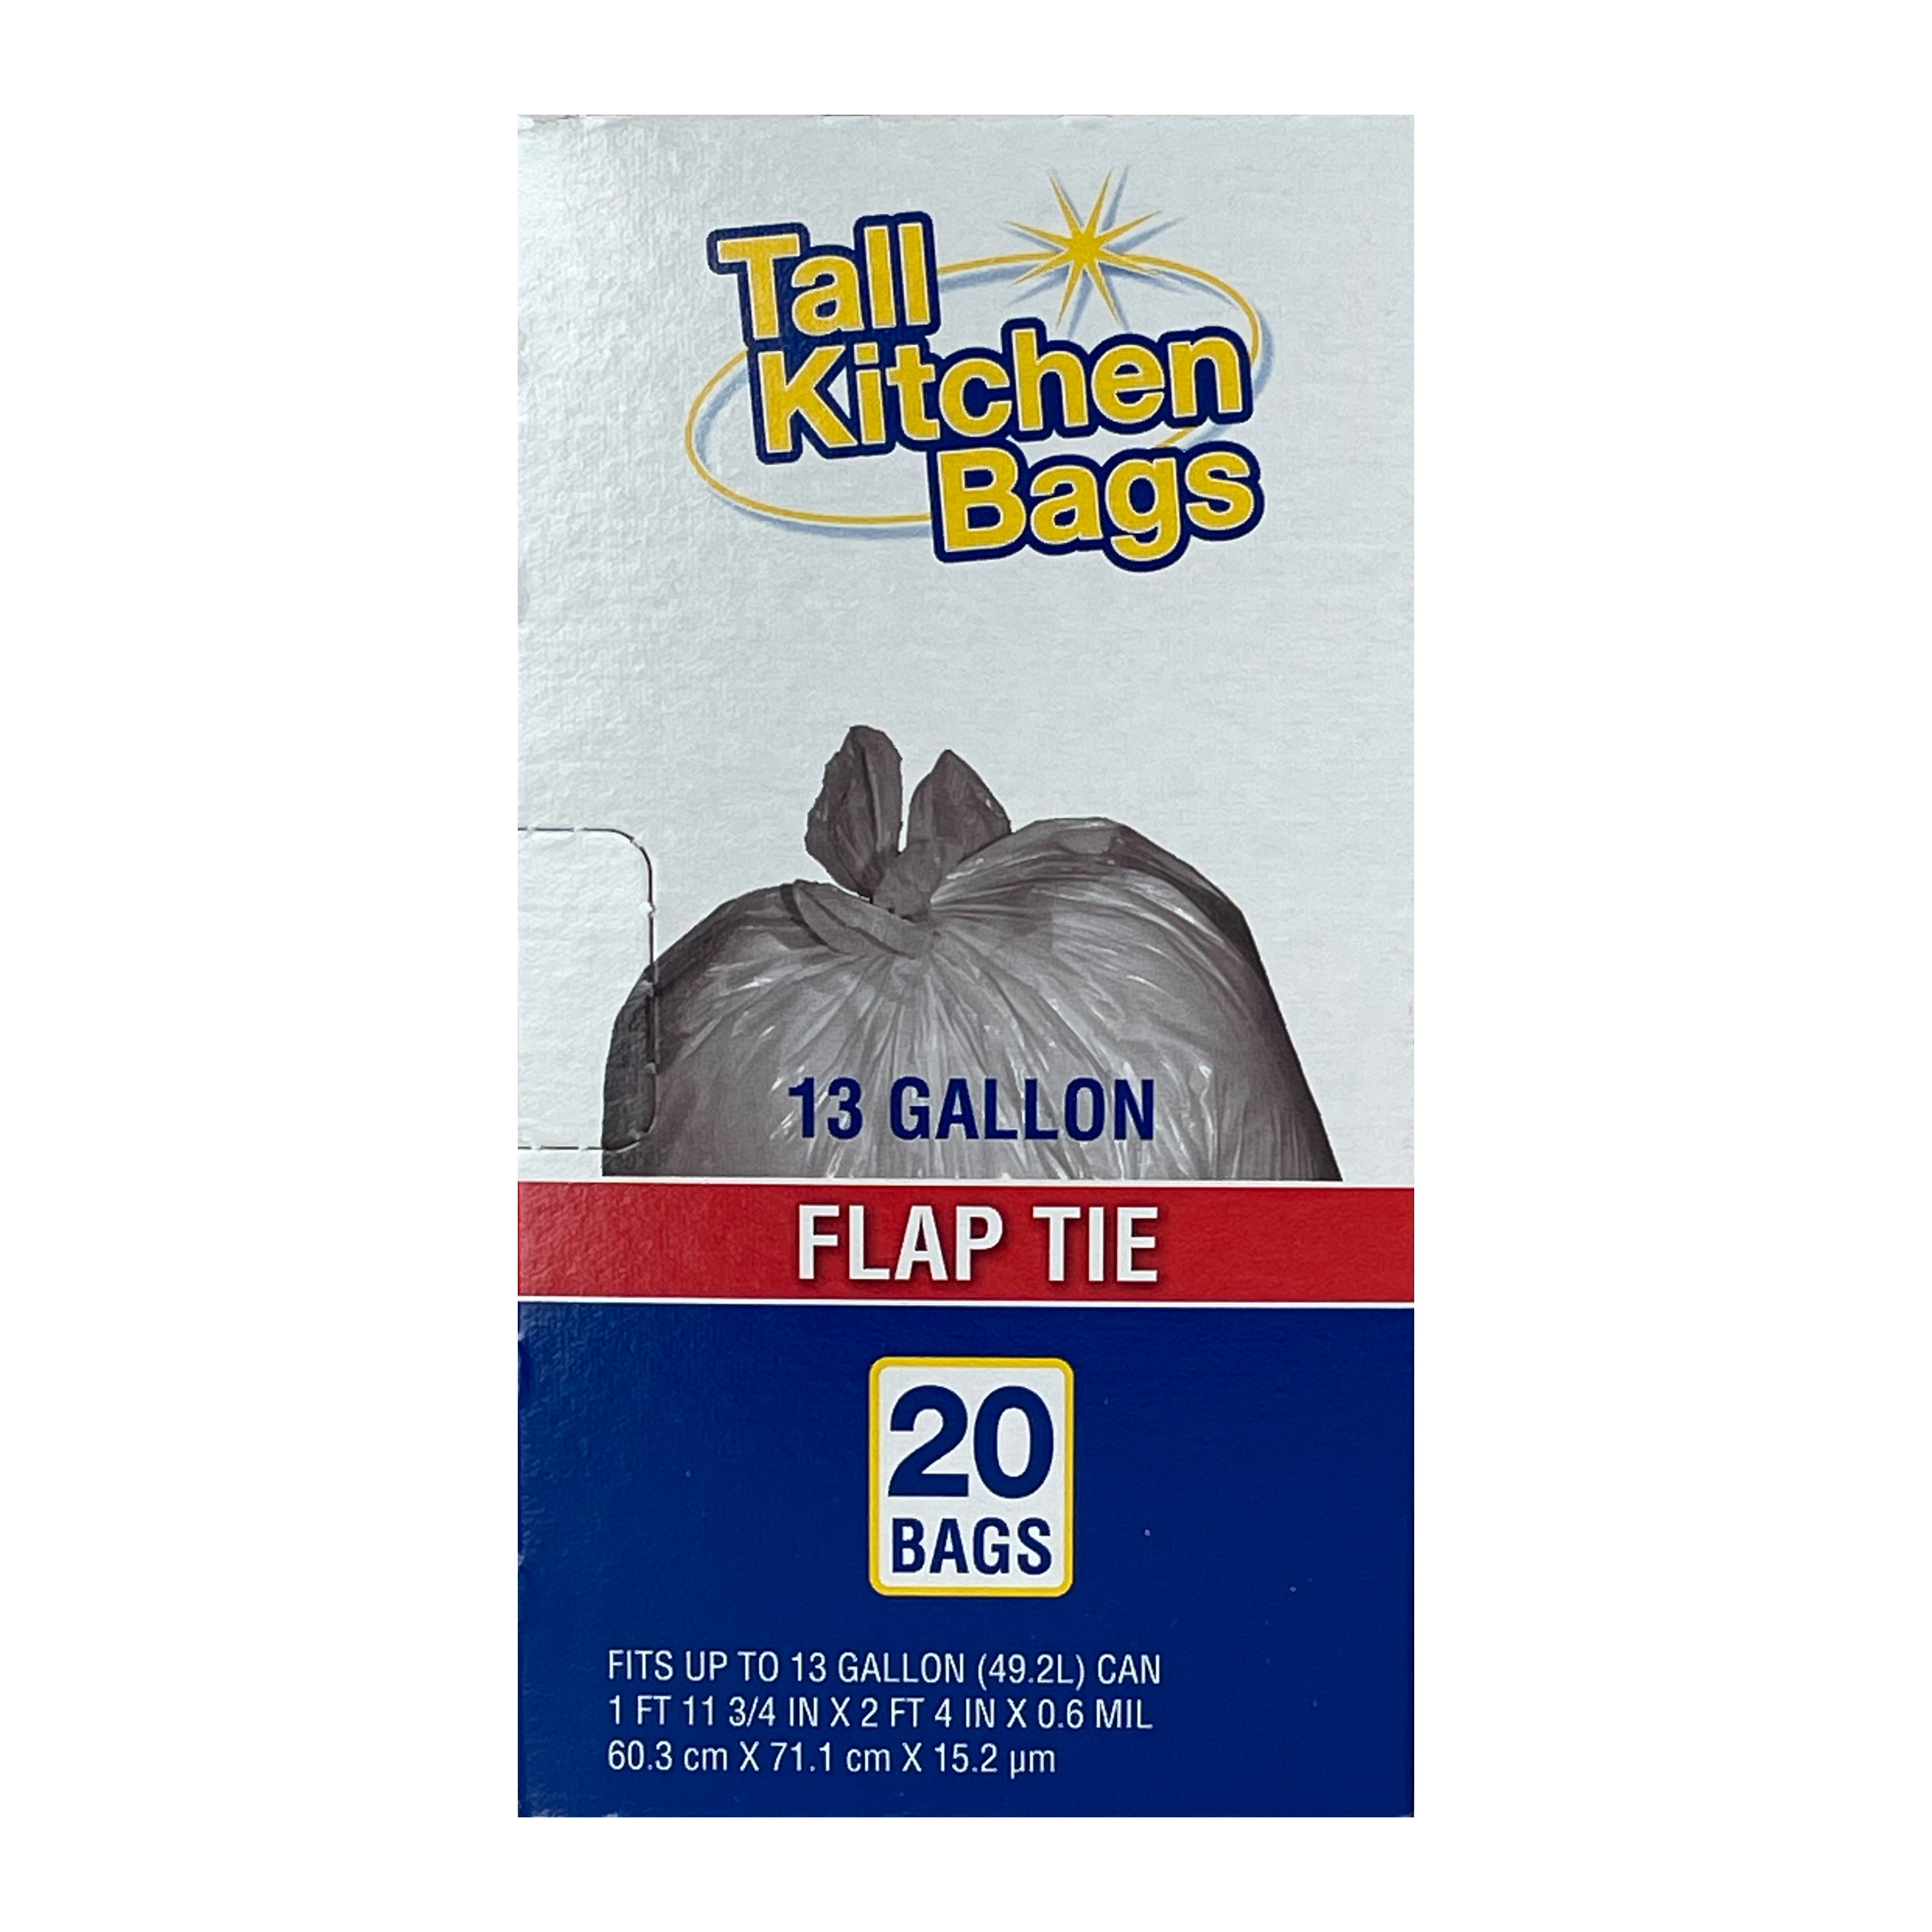 Our Family Tall Kitchen Bags, Flap Tie, 13 Gallon - 80 bags